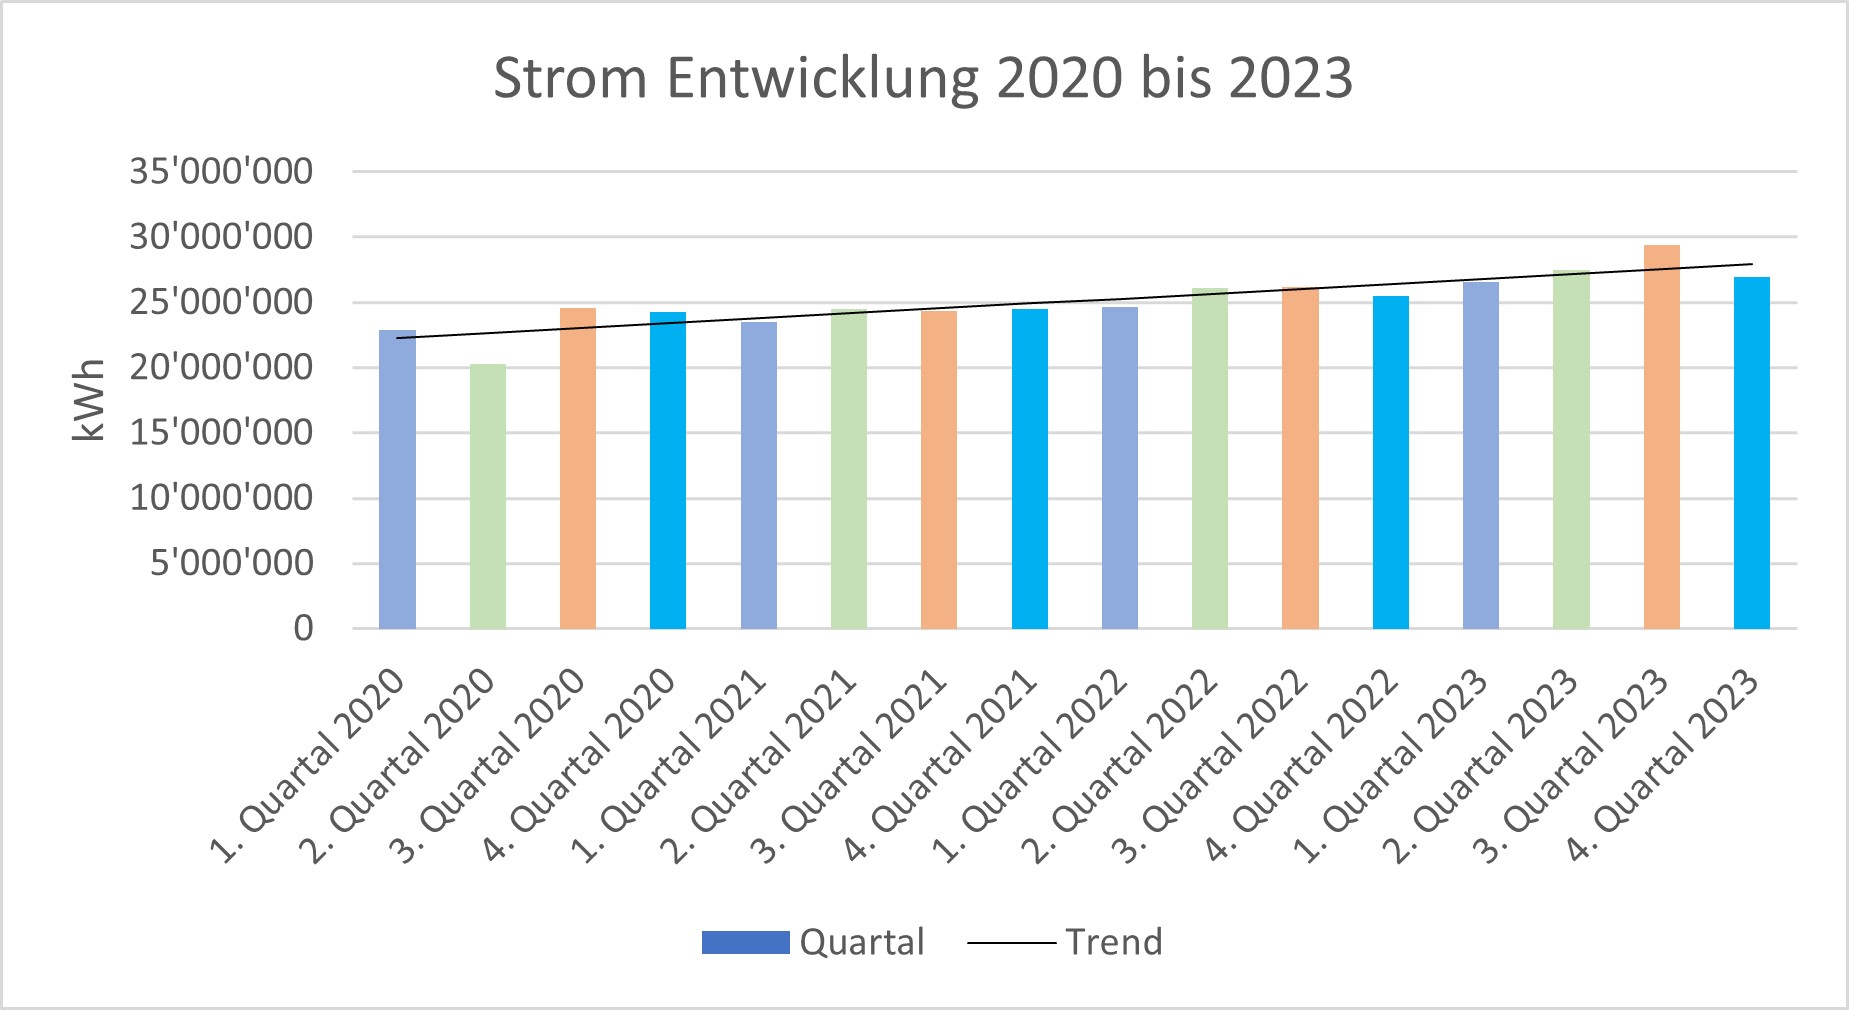 Enlarged view: The graph shows the total electricity consumption of ETH Zurich on the Hönggerberg campus, on the Centre Campus and in Schwerzenbach and Lindau-Eschikon for all quarters in the period from 2020 to 2023.